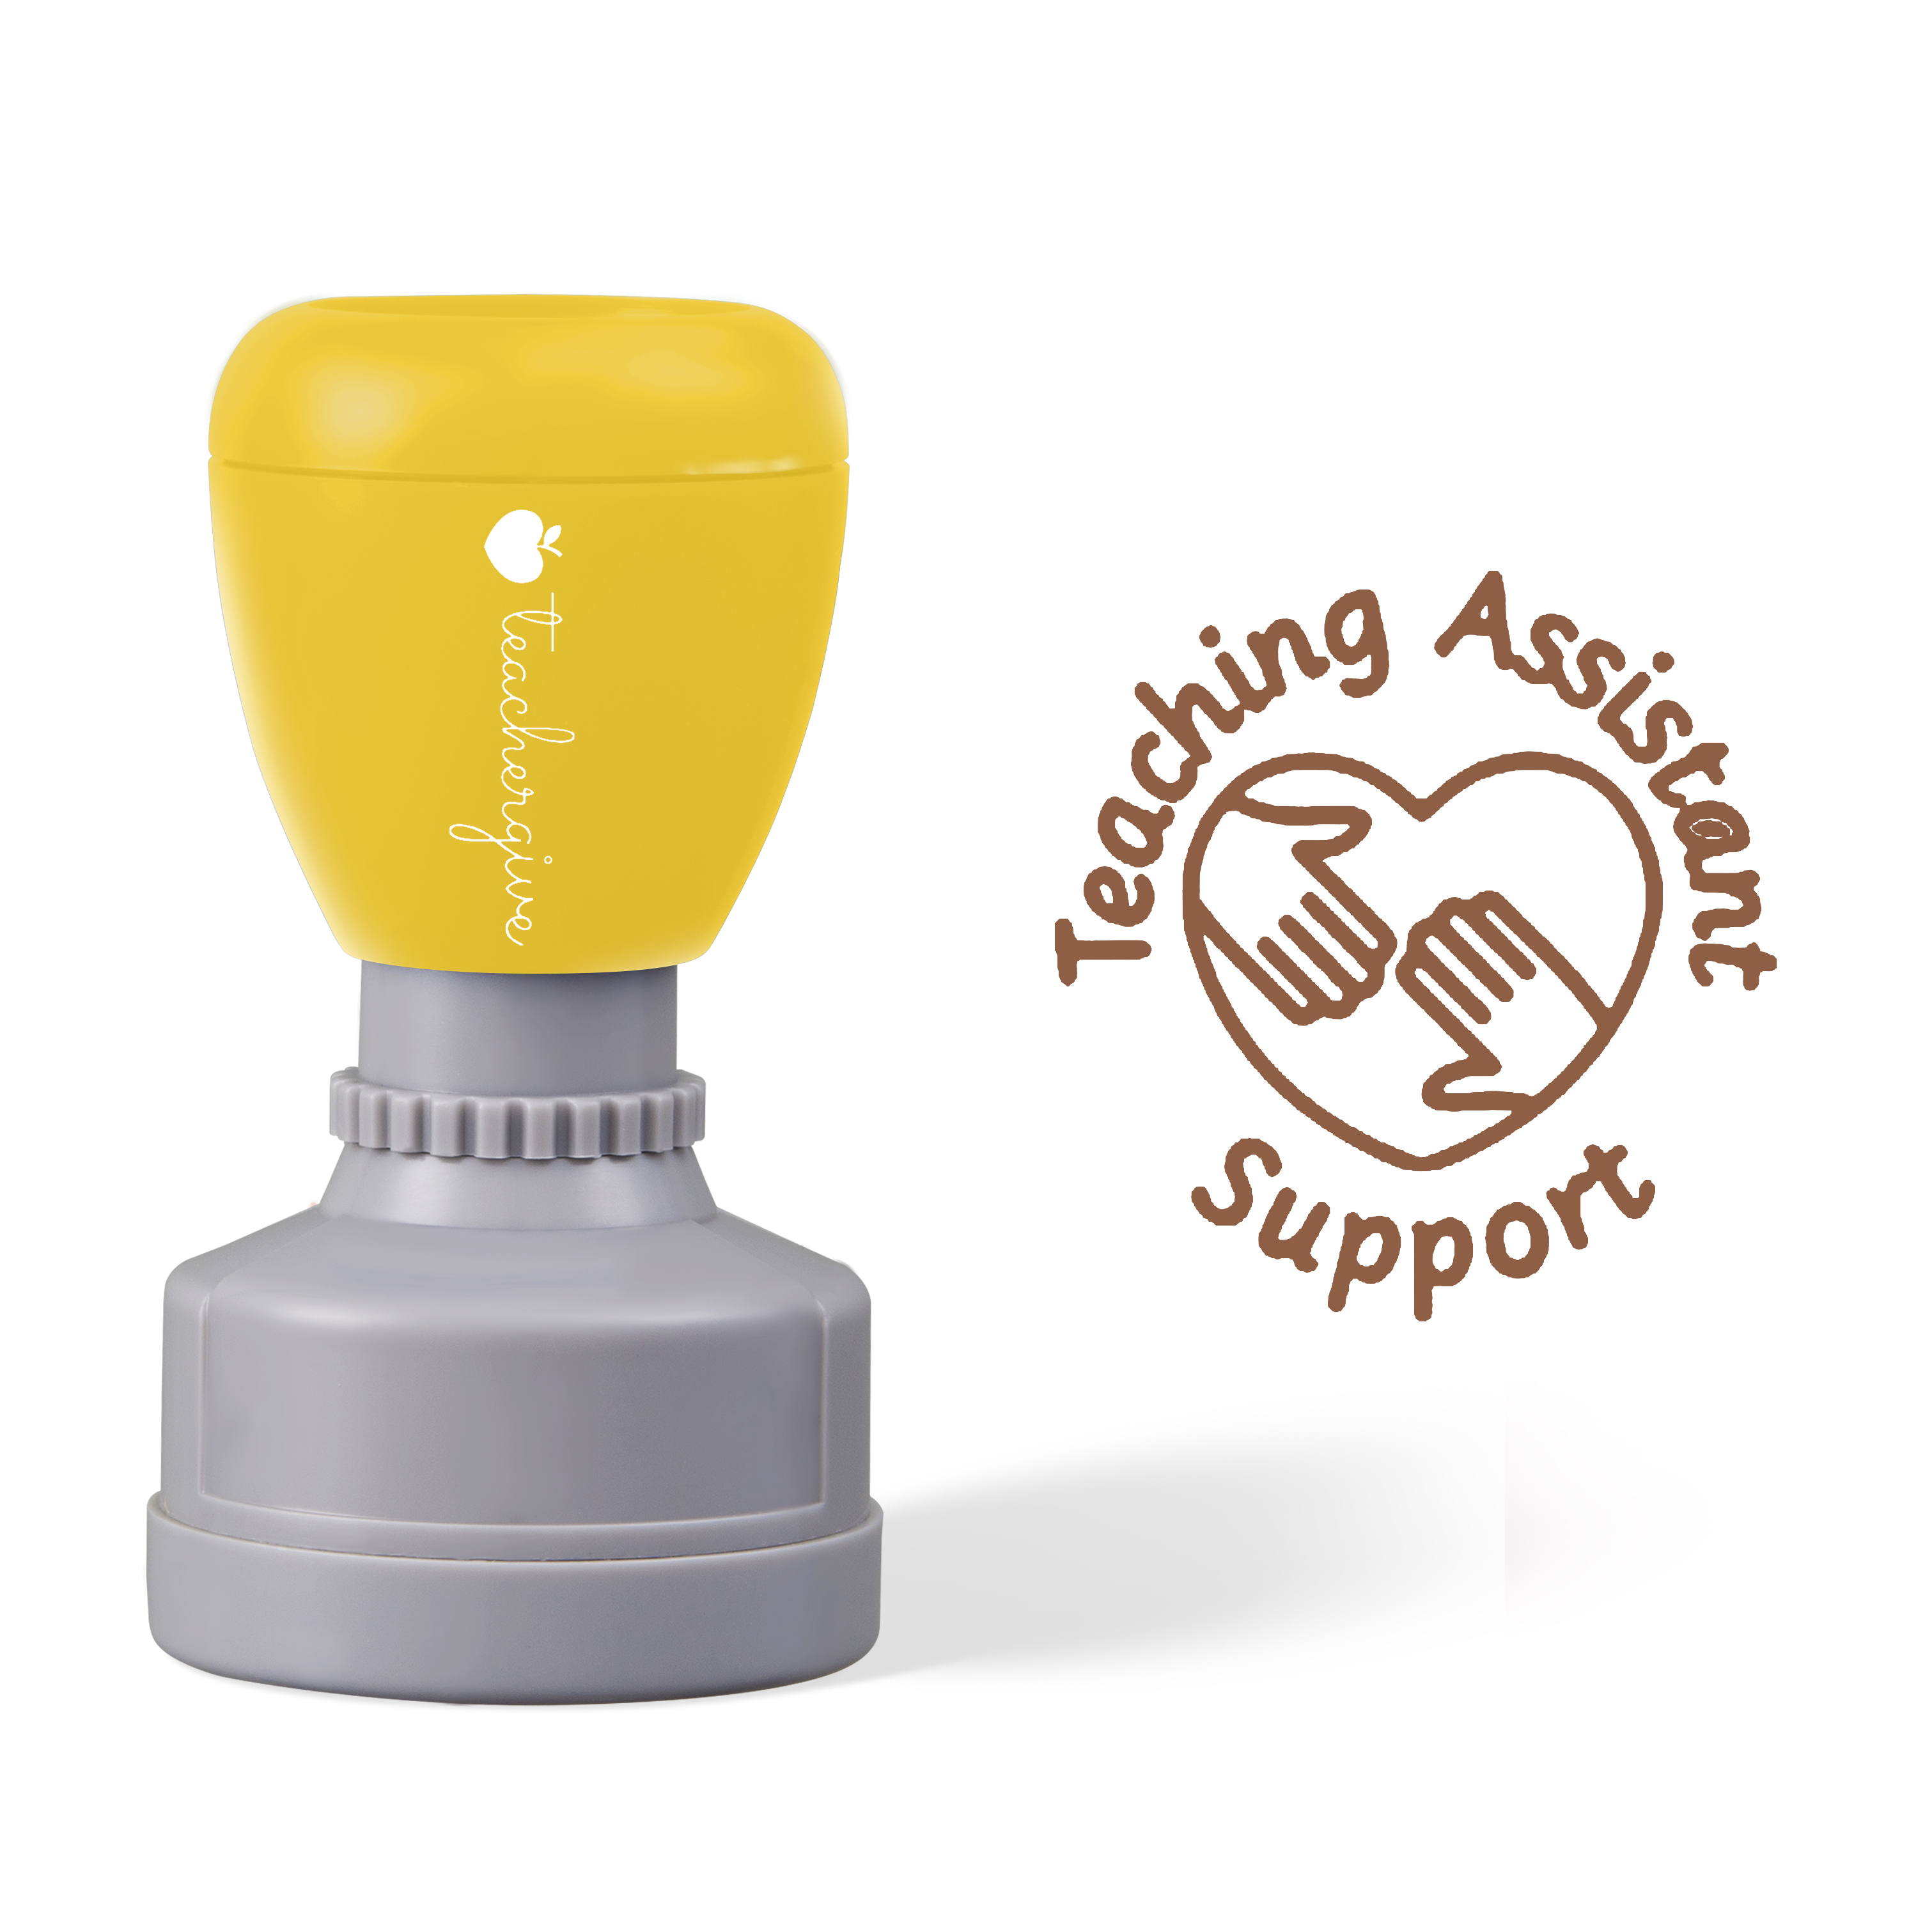 Teaching Assistant Support Stamp